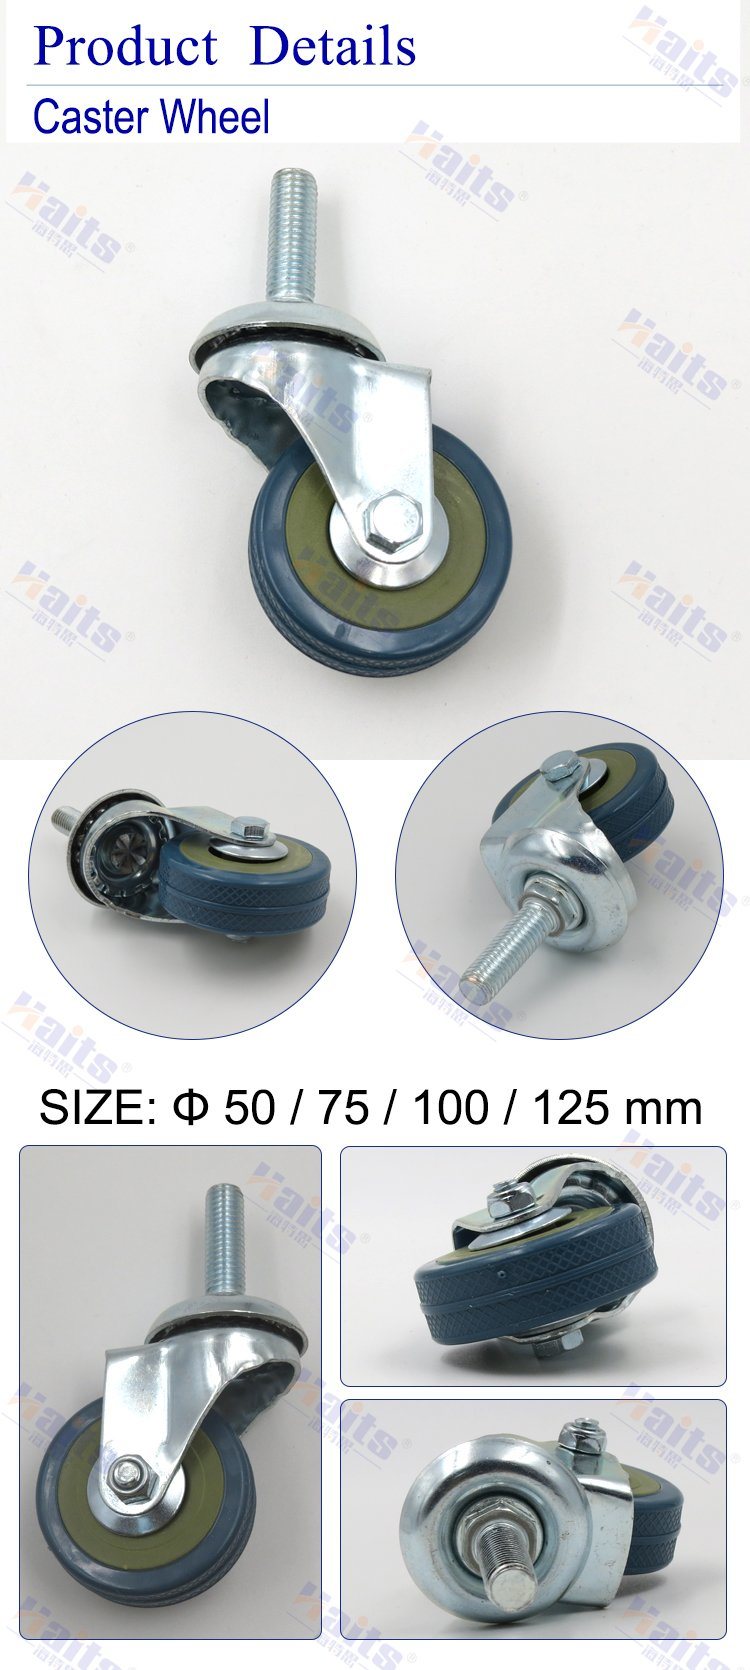 Suitcase Caster Wheels Plate Caster Medical Metal Caster Wheels Furniture Container Caster